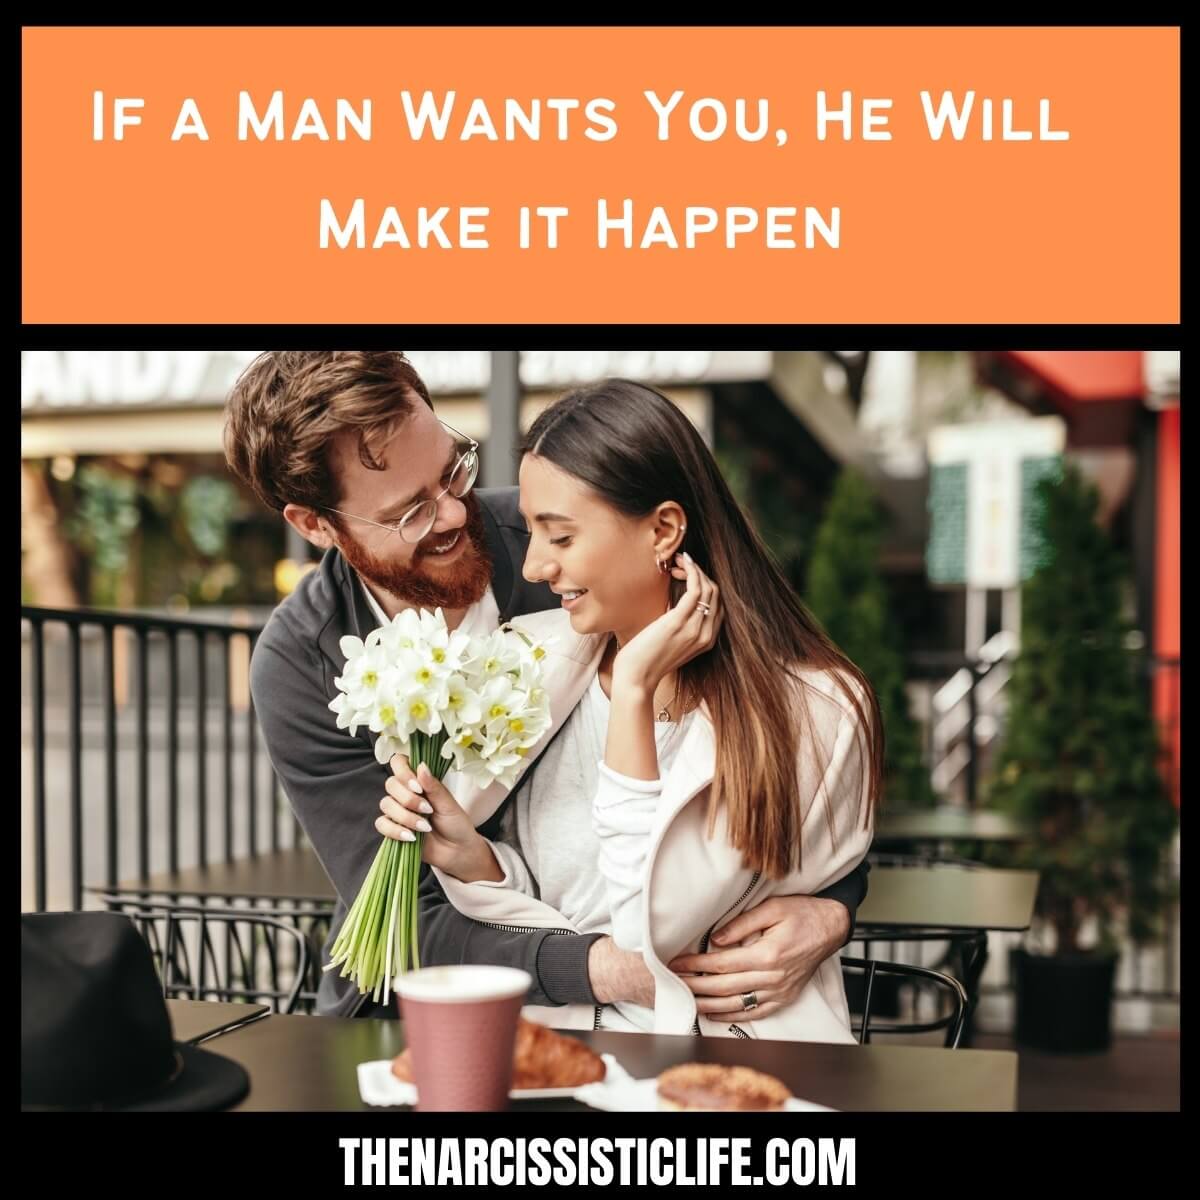 If a Man Wants You, He Will Make it Happen